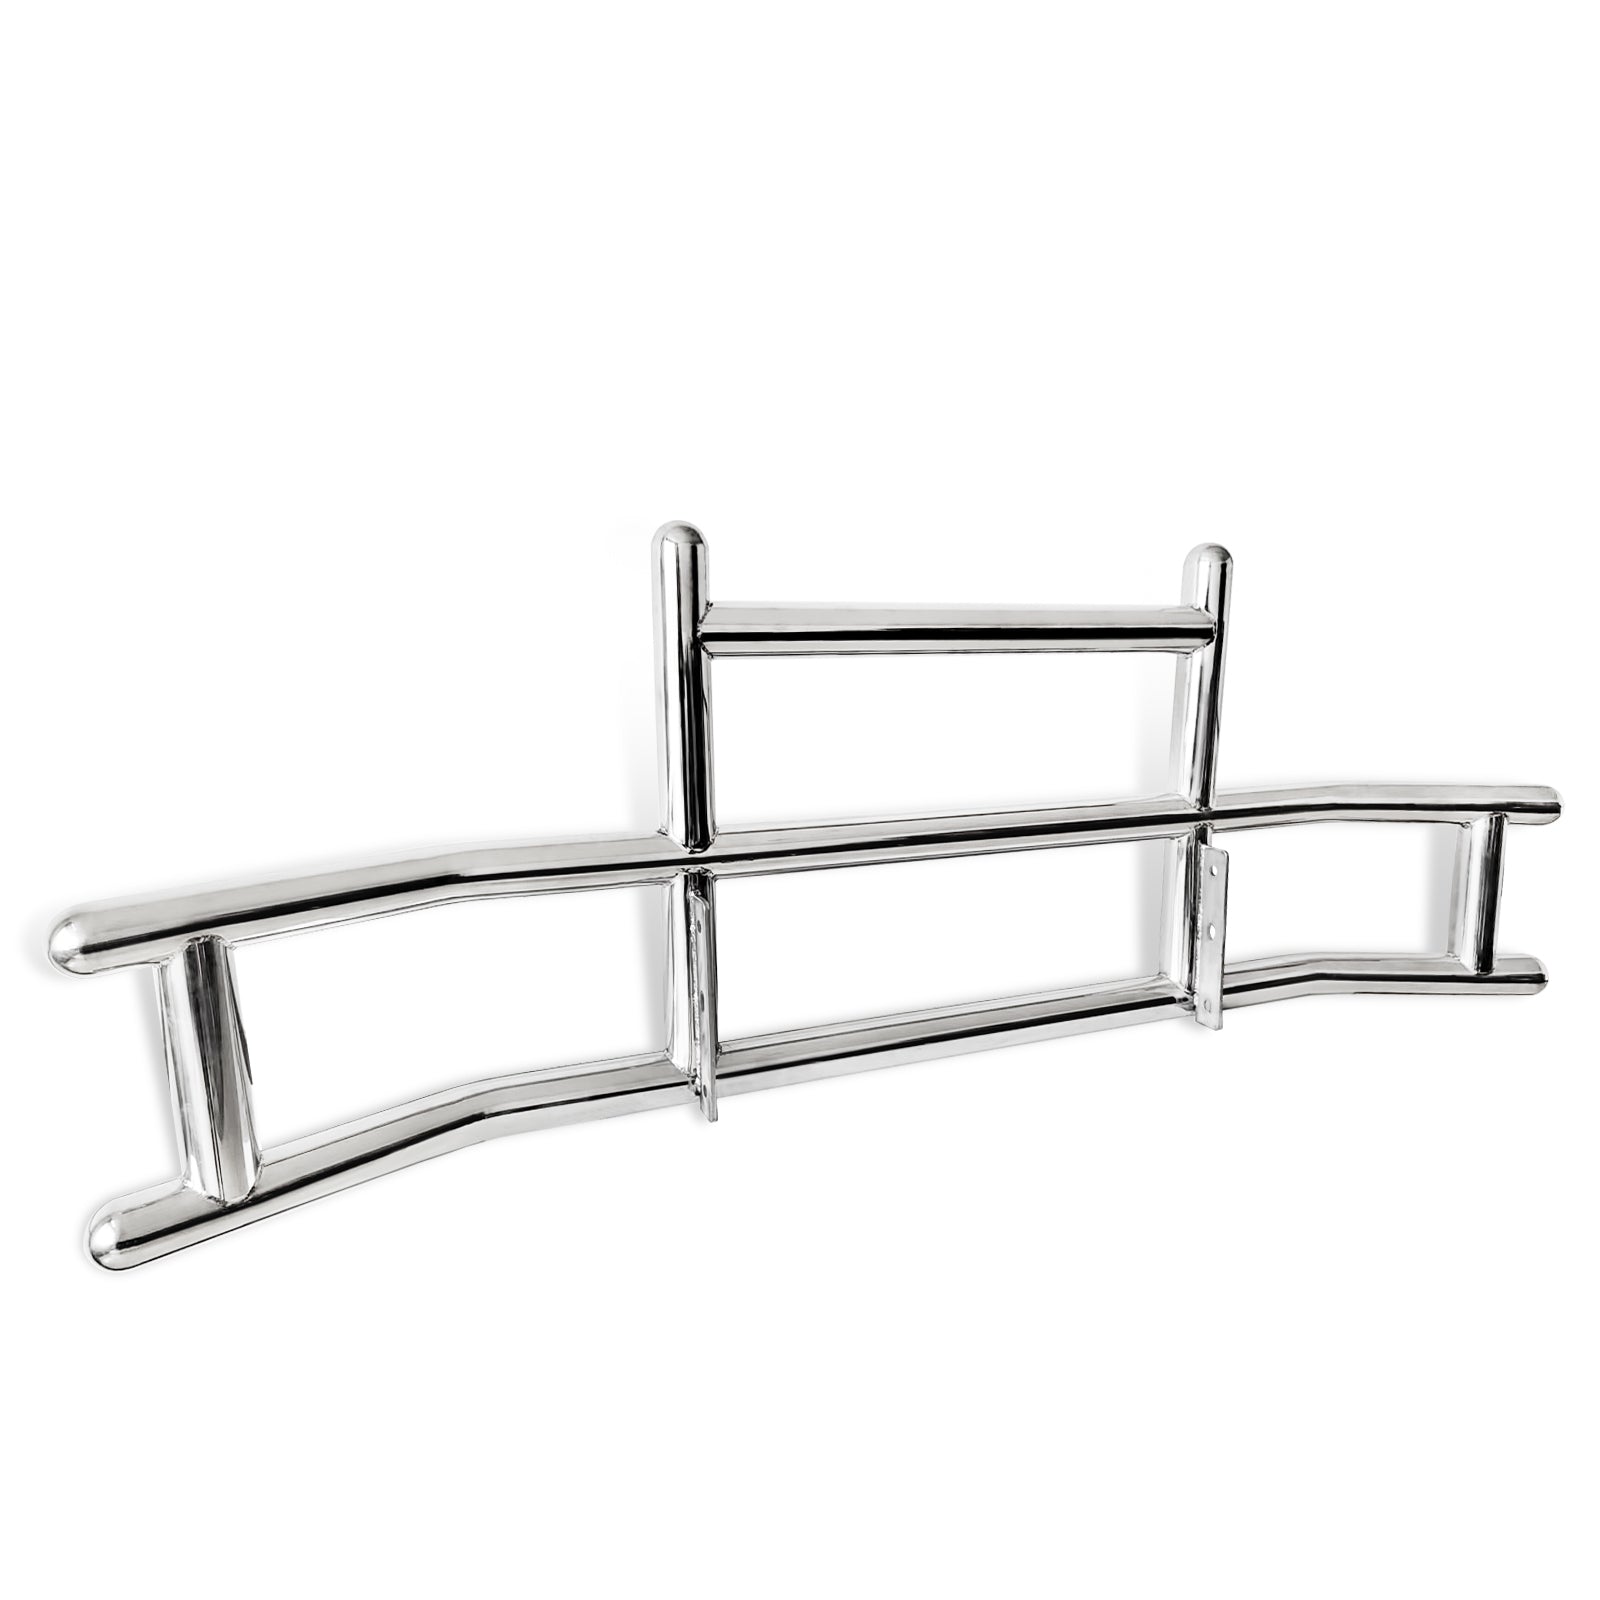 Stainless Steel Integrated Deer Guard Bumper S76Y889 chrome-stainless steel